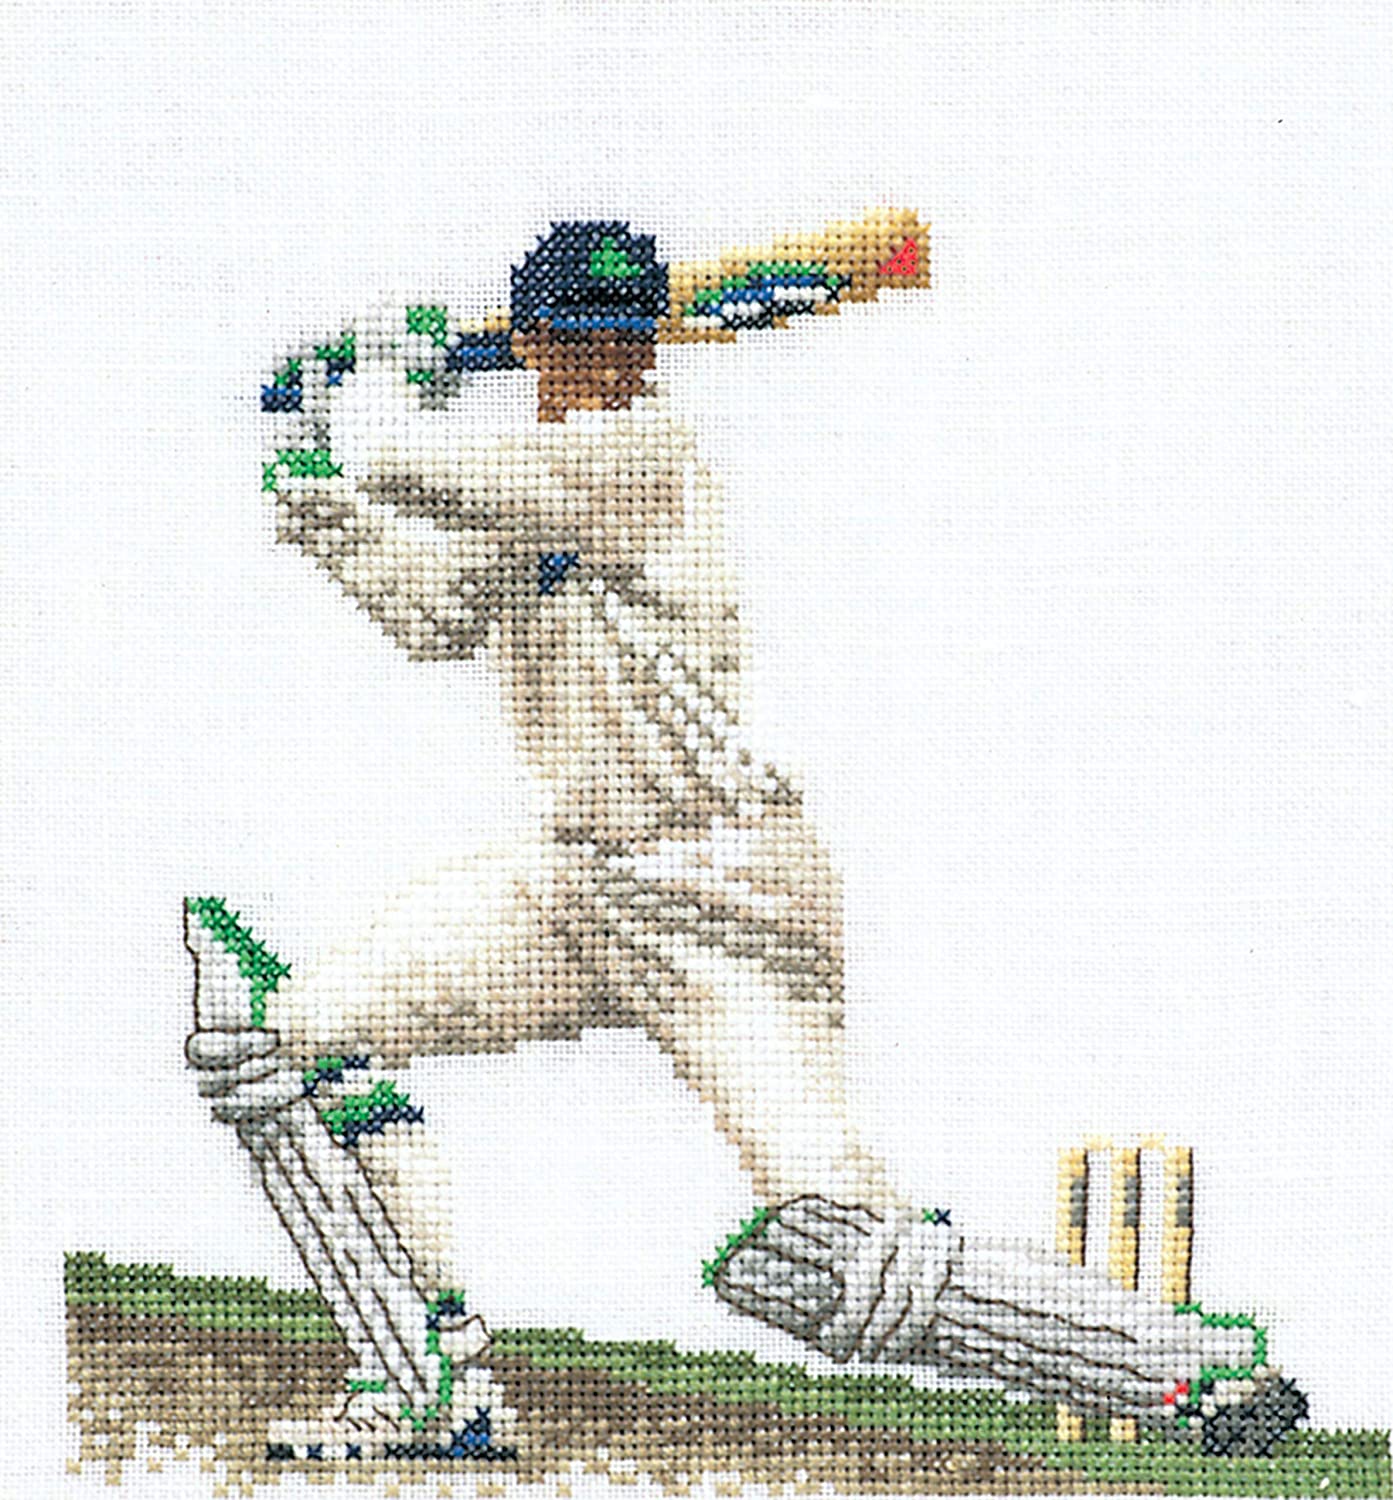 Thea Gouverneur Cross Stitch Kit - Cricket 3089. Counted cross stitch kit from the fabulous Thea Gouverneur in The Netherlands. This kit is available on either Aida or linen.